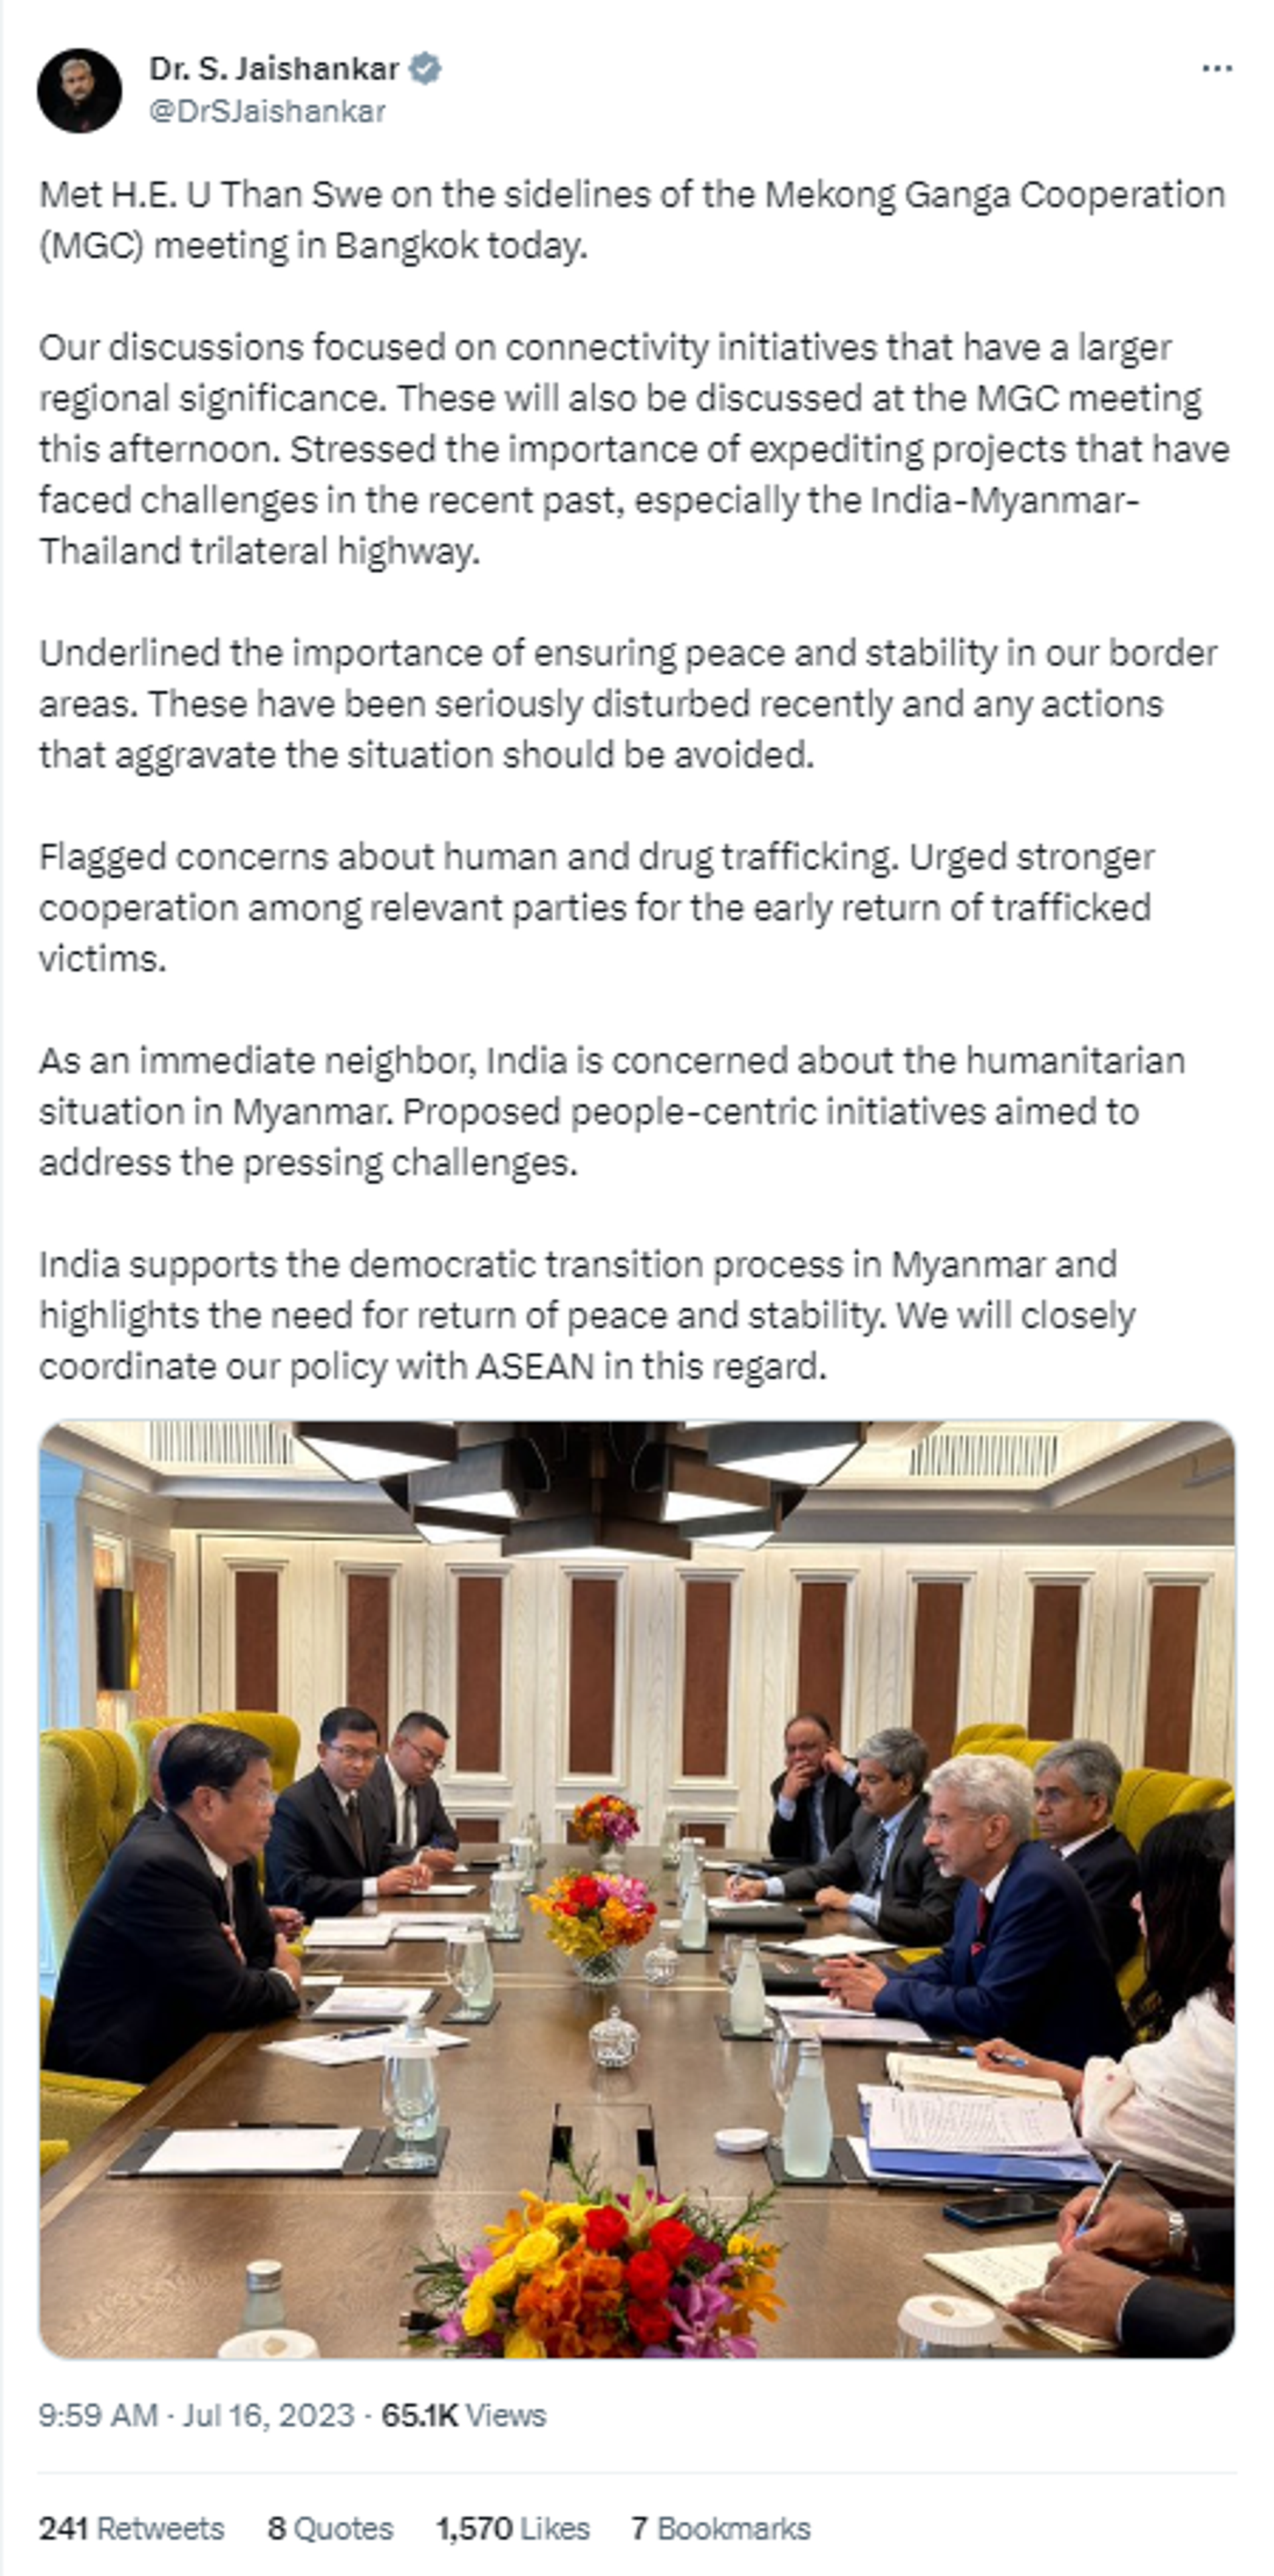 India's External Affairs Minister S. Jaishankar tweets about his discussion with Myanmar counterpart H.E. U Than Swe on the sidelines of the Mekong Ganga Cooperation (MGC) meeting in Bangkok. - Sputnik India, 1920, 16.07.2023